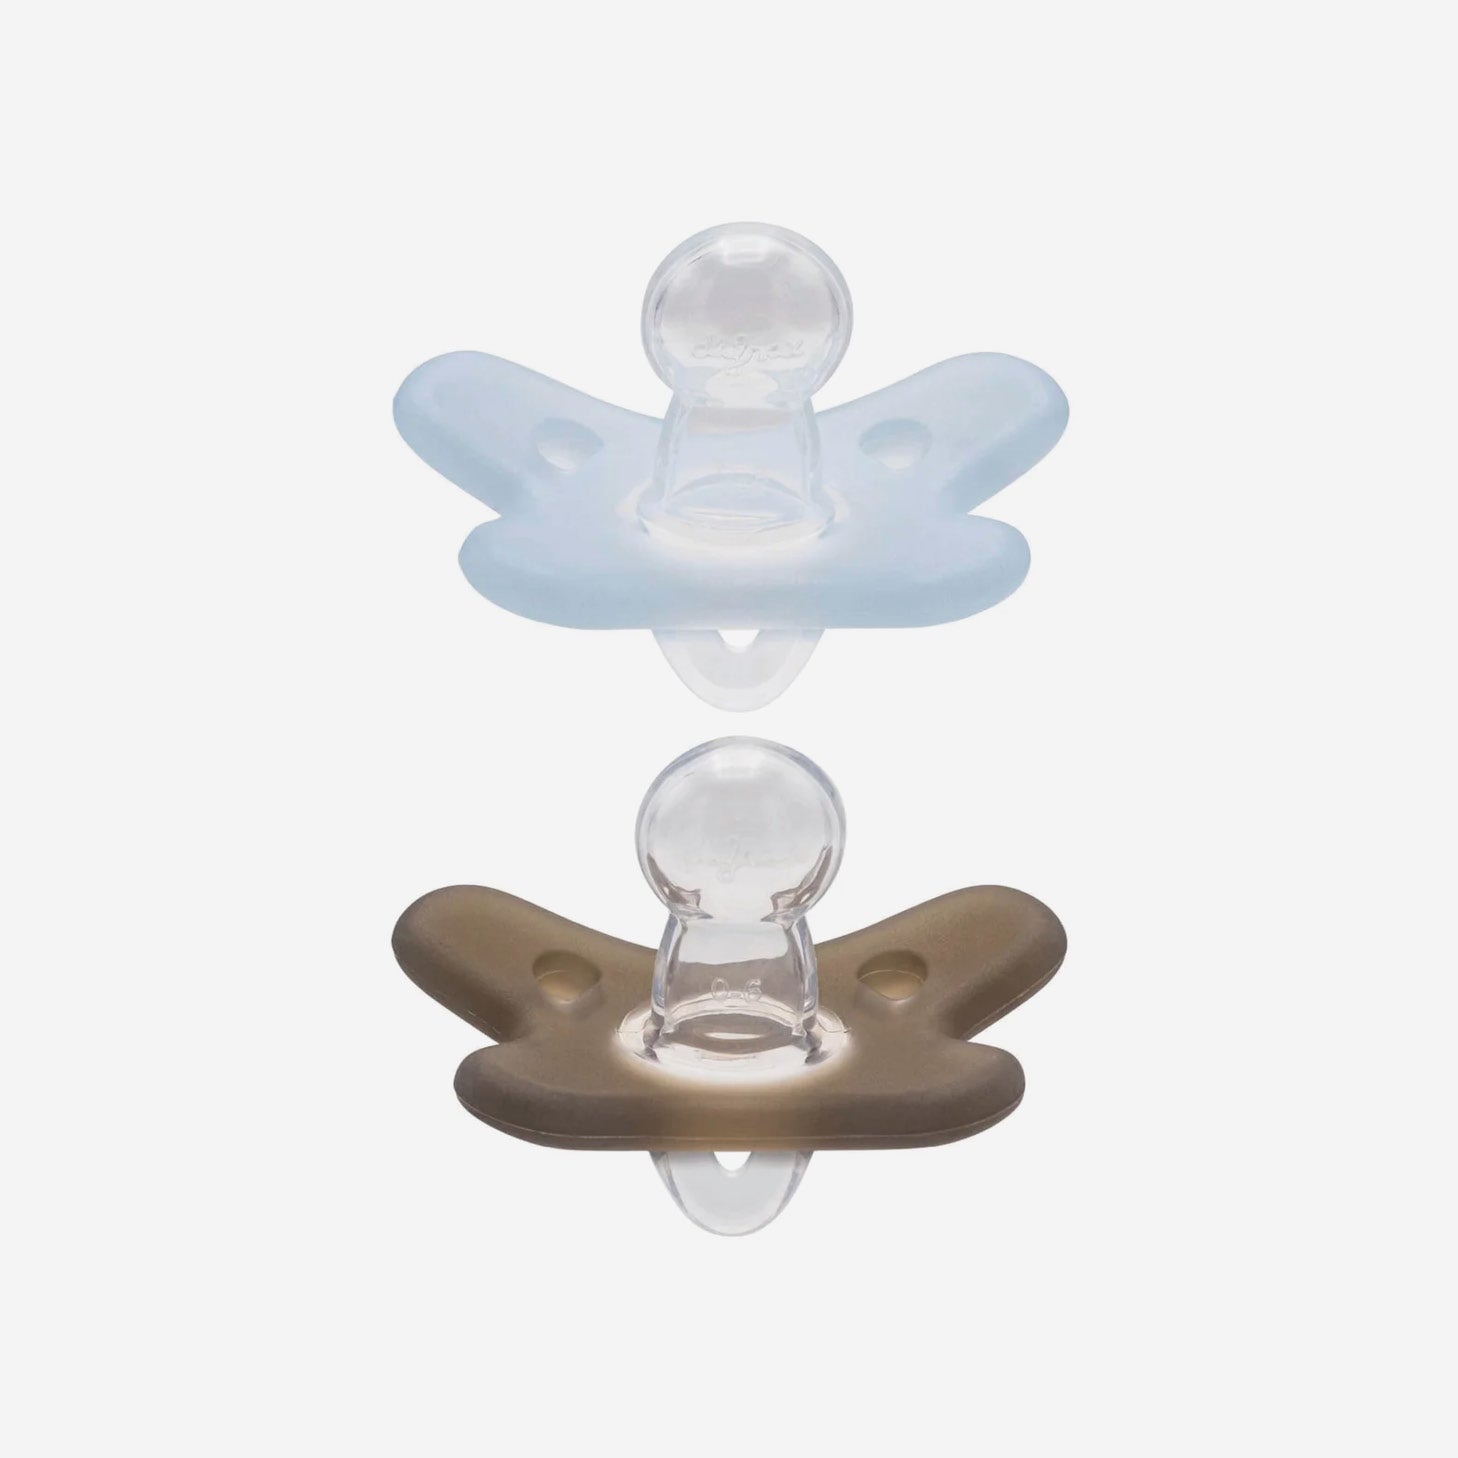 Difrax Silicone Pacifier (0-6 Months) - Duo Pack